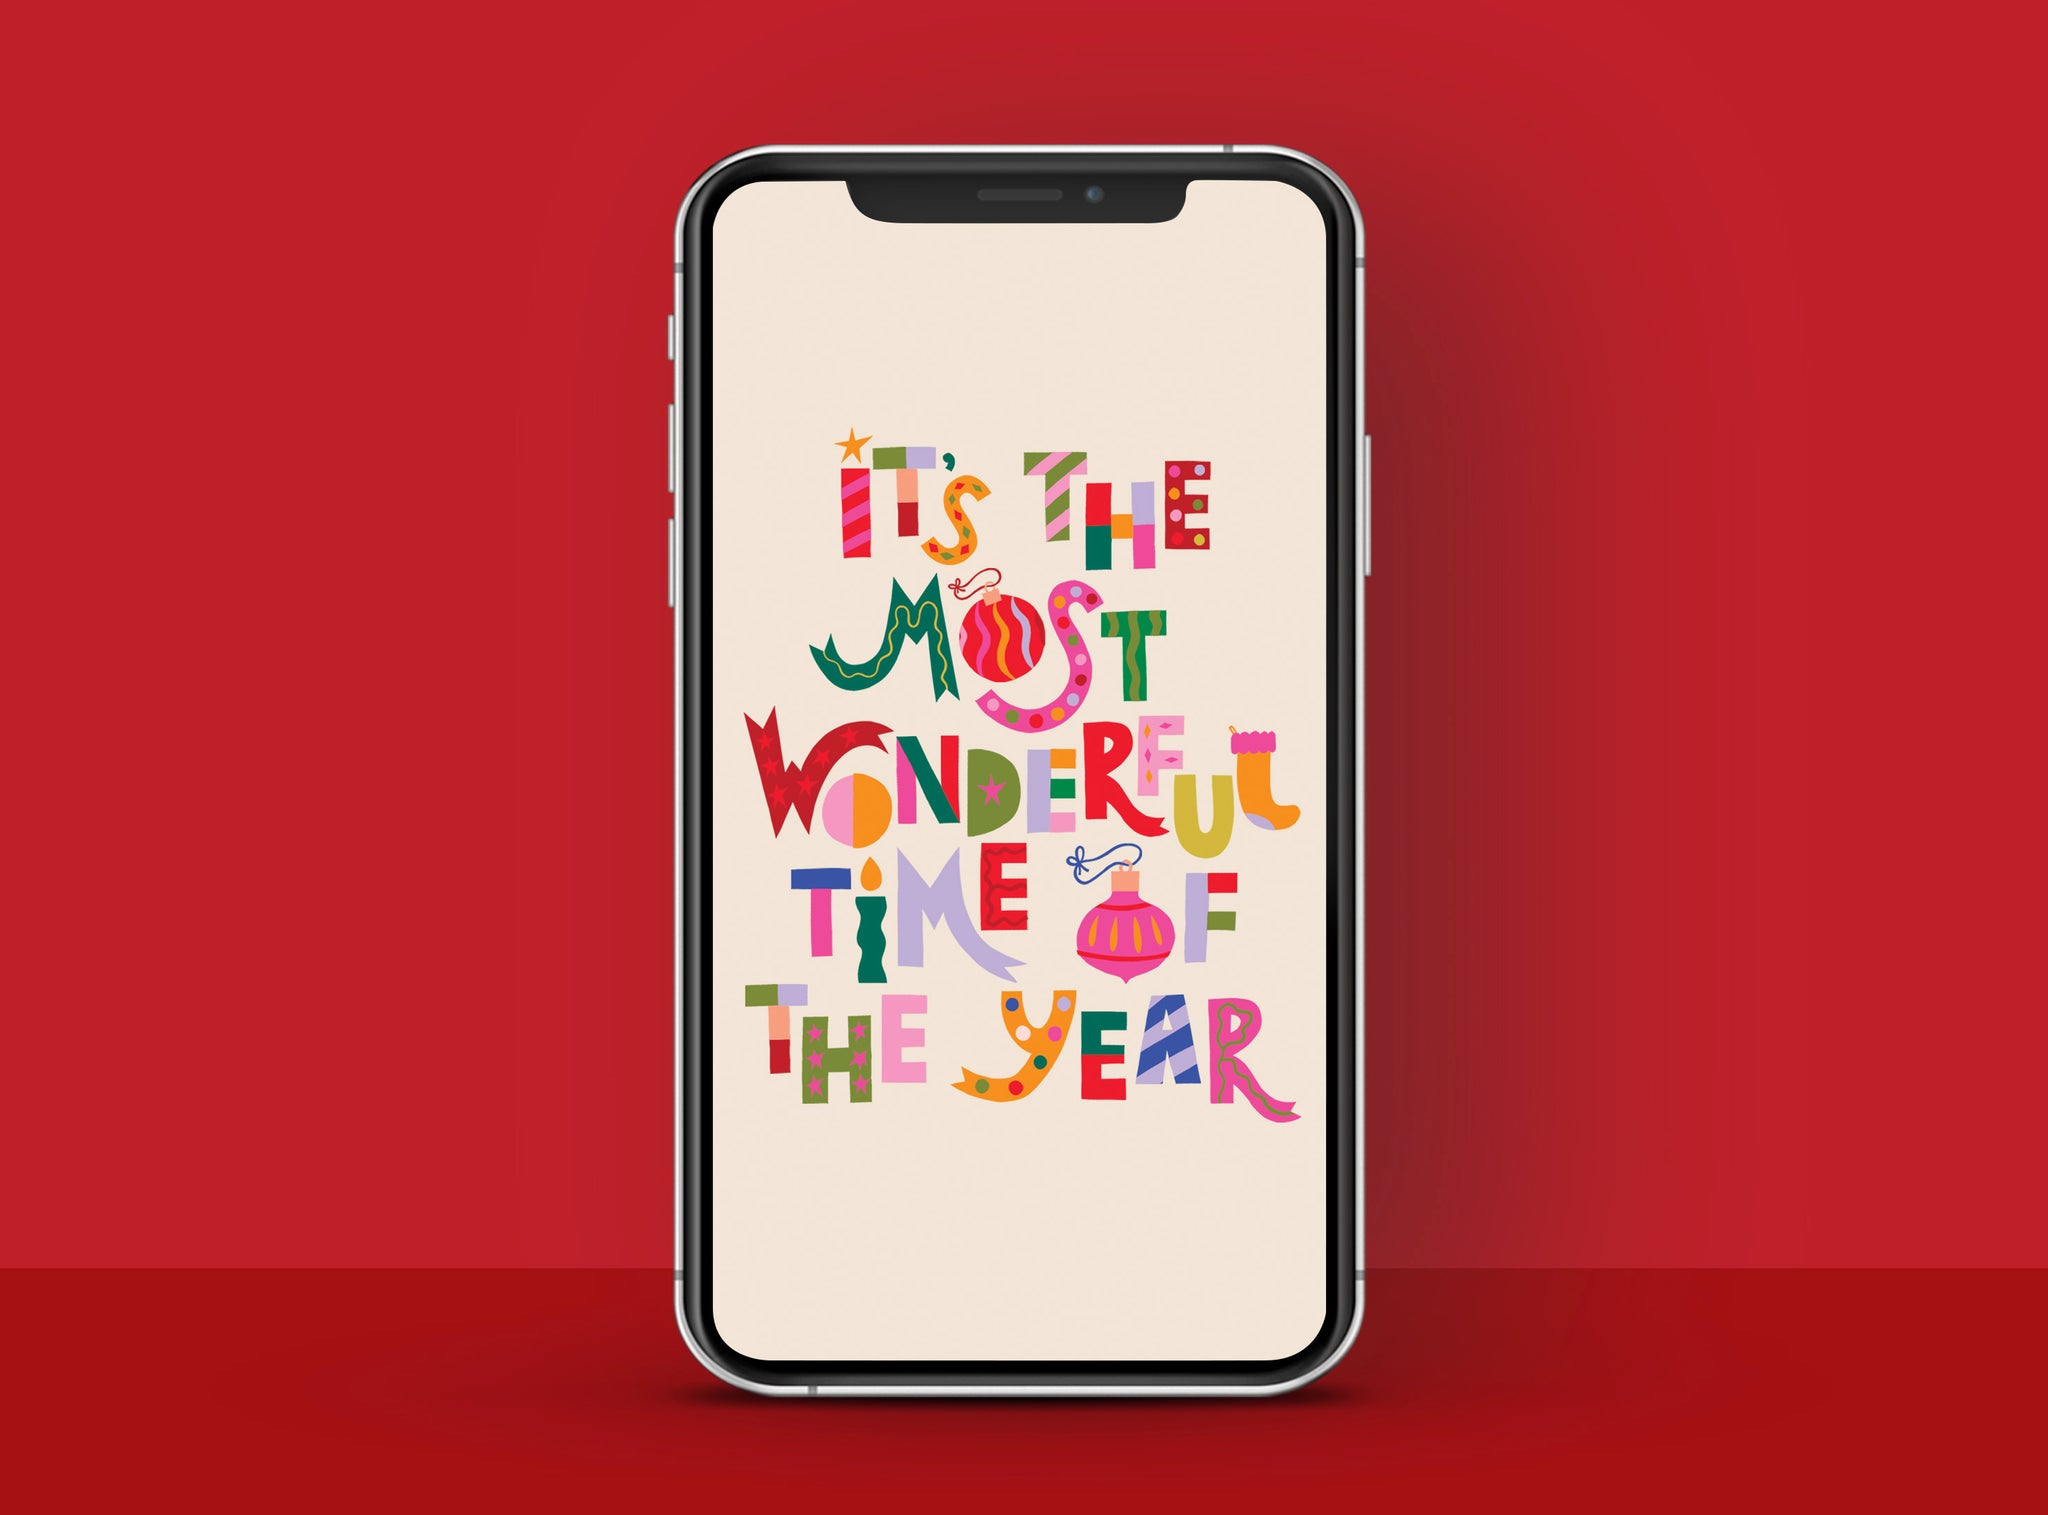 Playful type with 'It's the most wonderful time of the year' Christmas message phone wallpaper | Raspberry Blossom